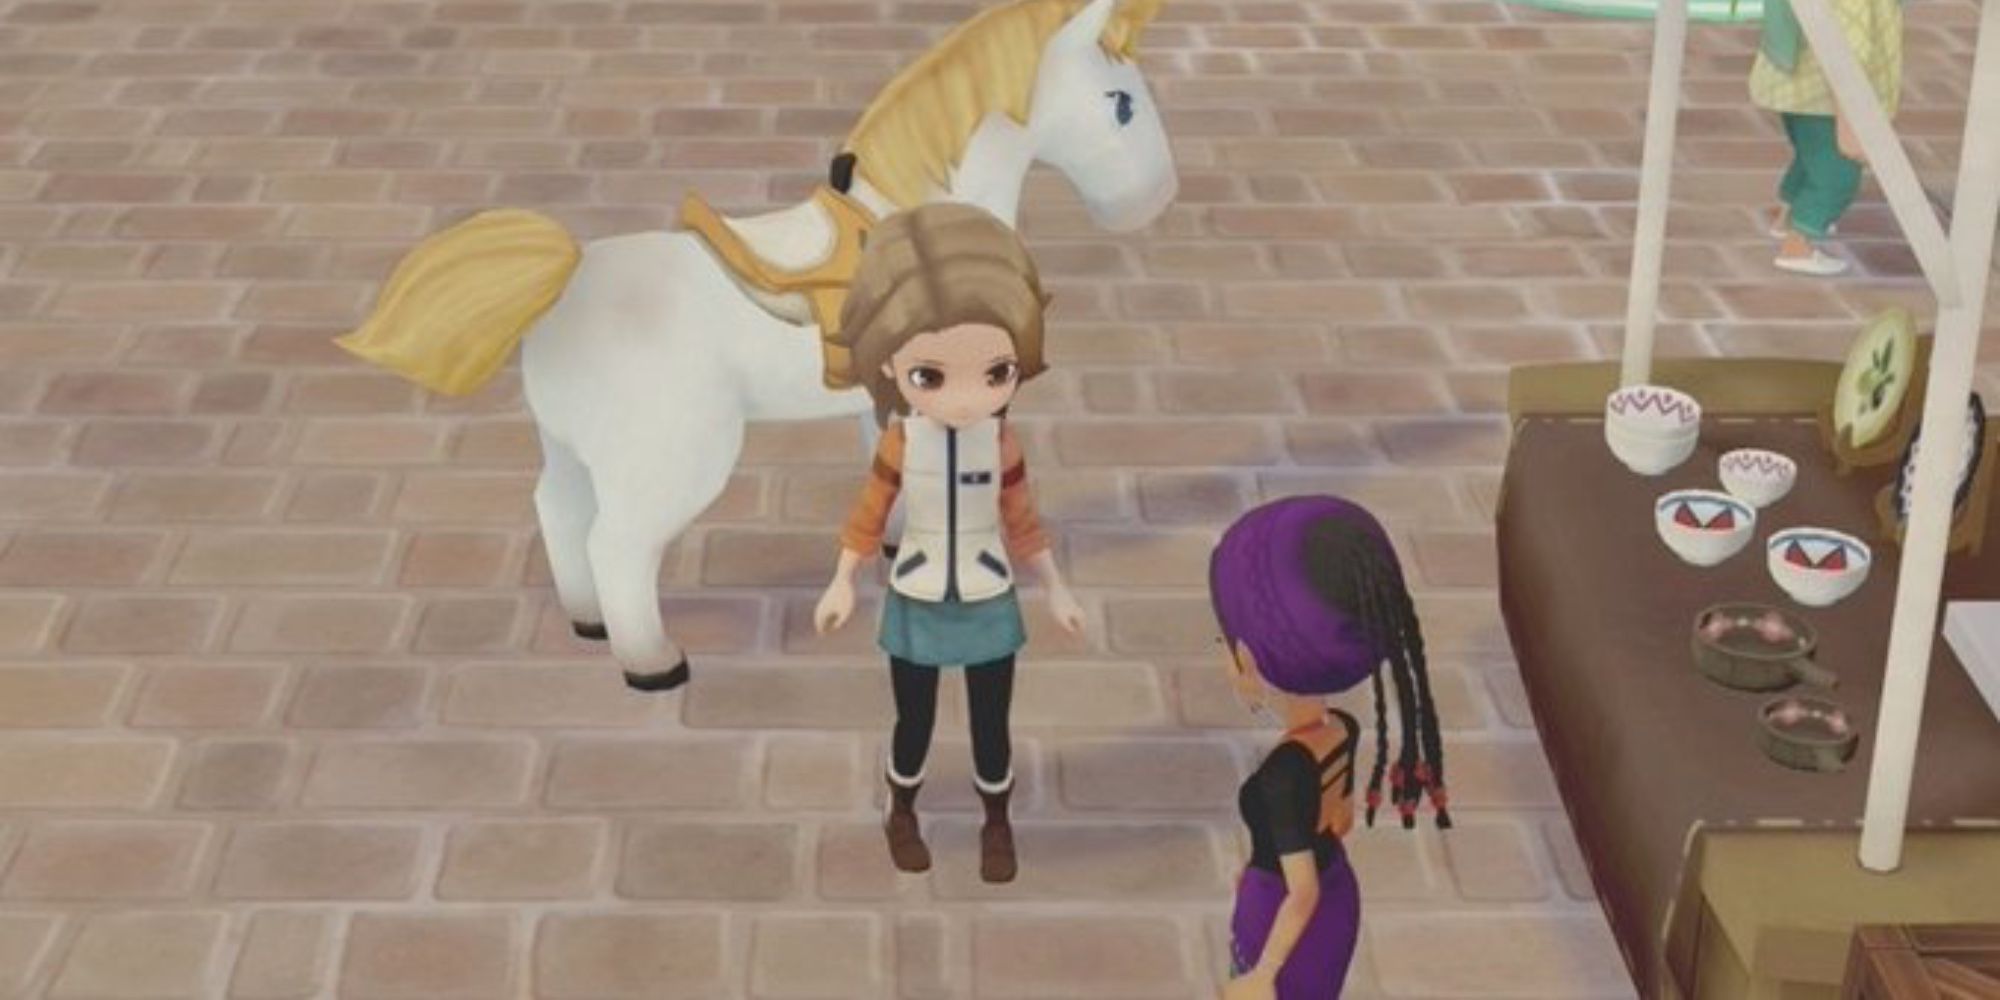 the character pioneers of olive town with a unicorn and a villager